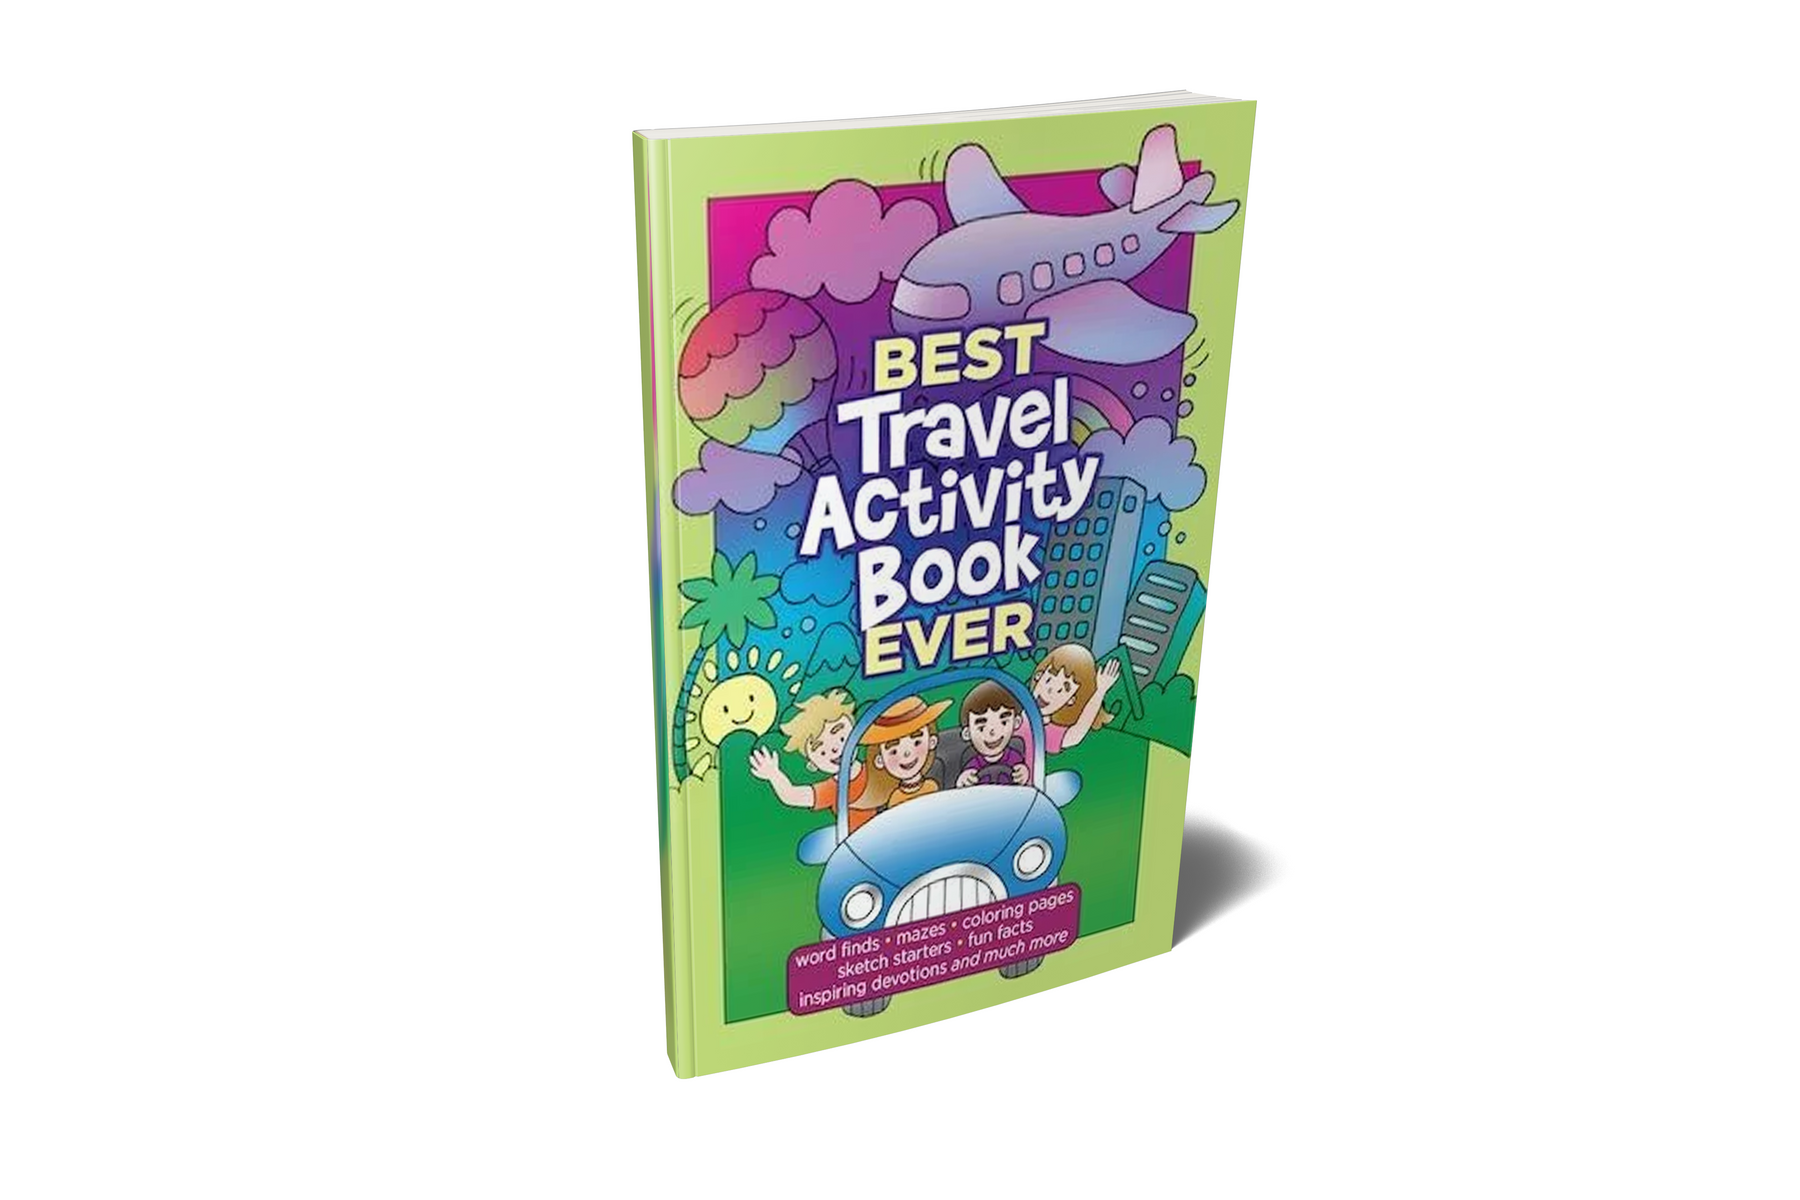 Best Travel Activity Book Ever by Broadstreet Publishing Group